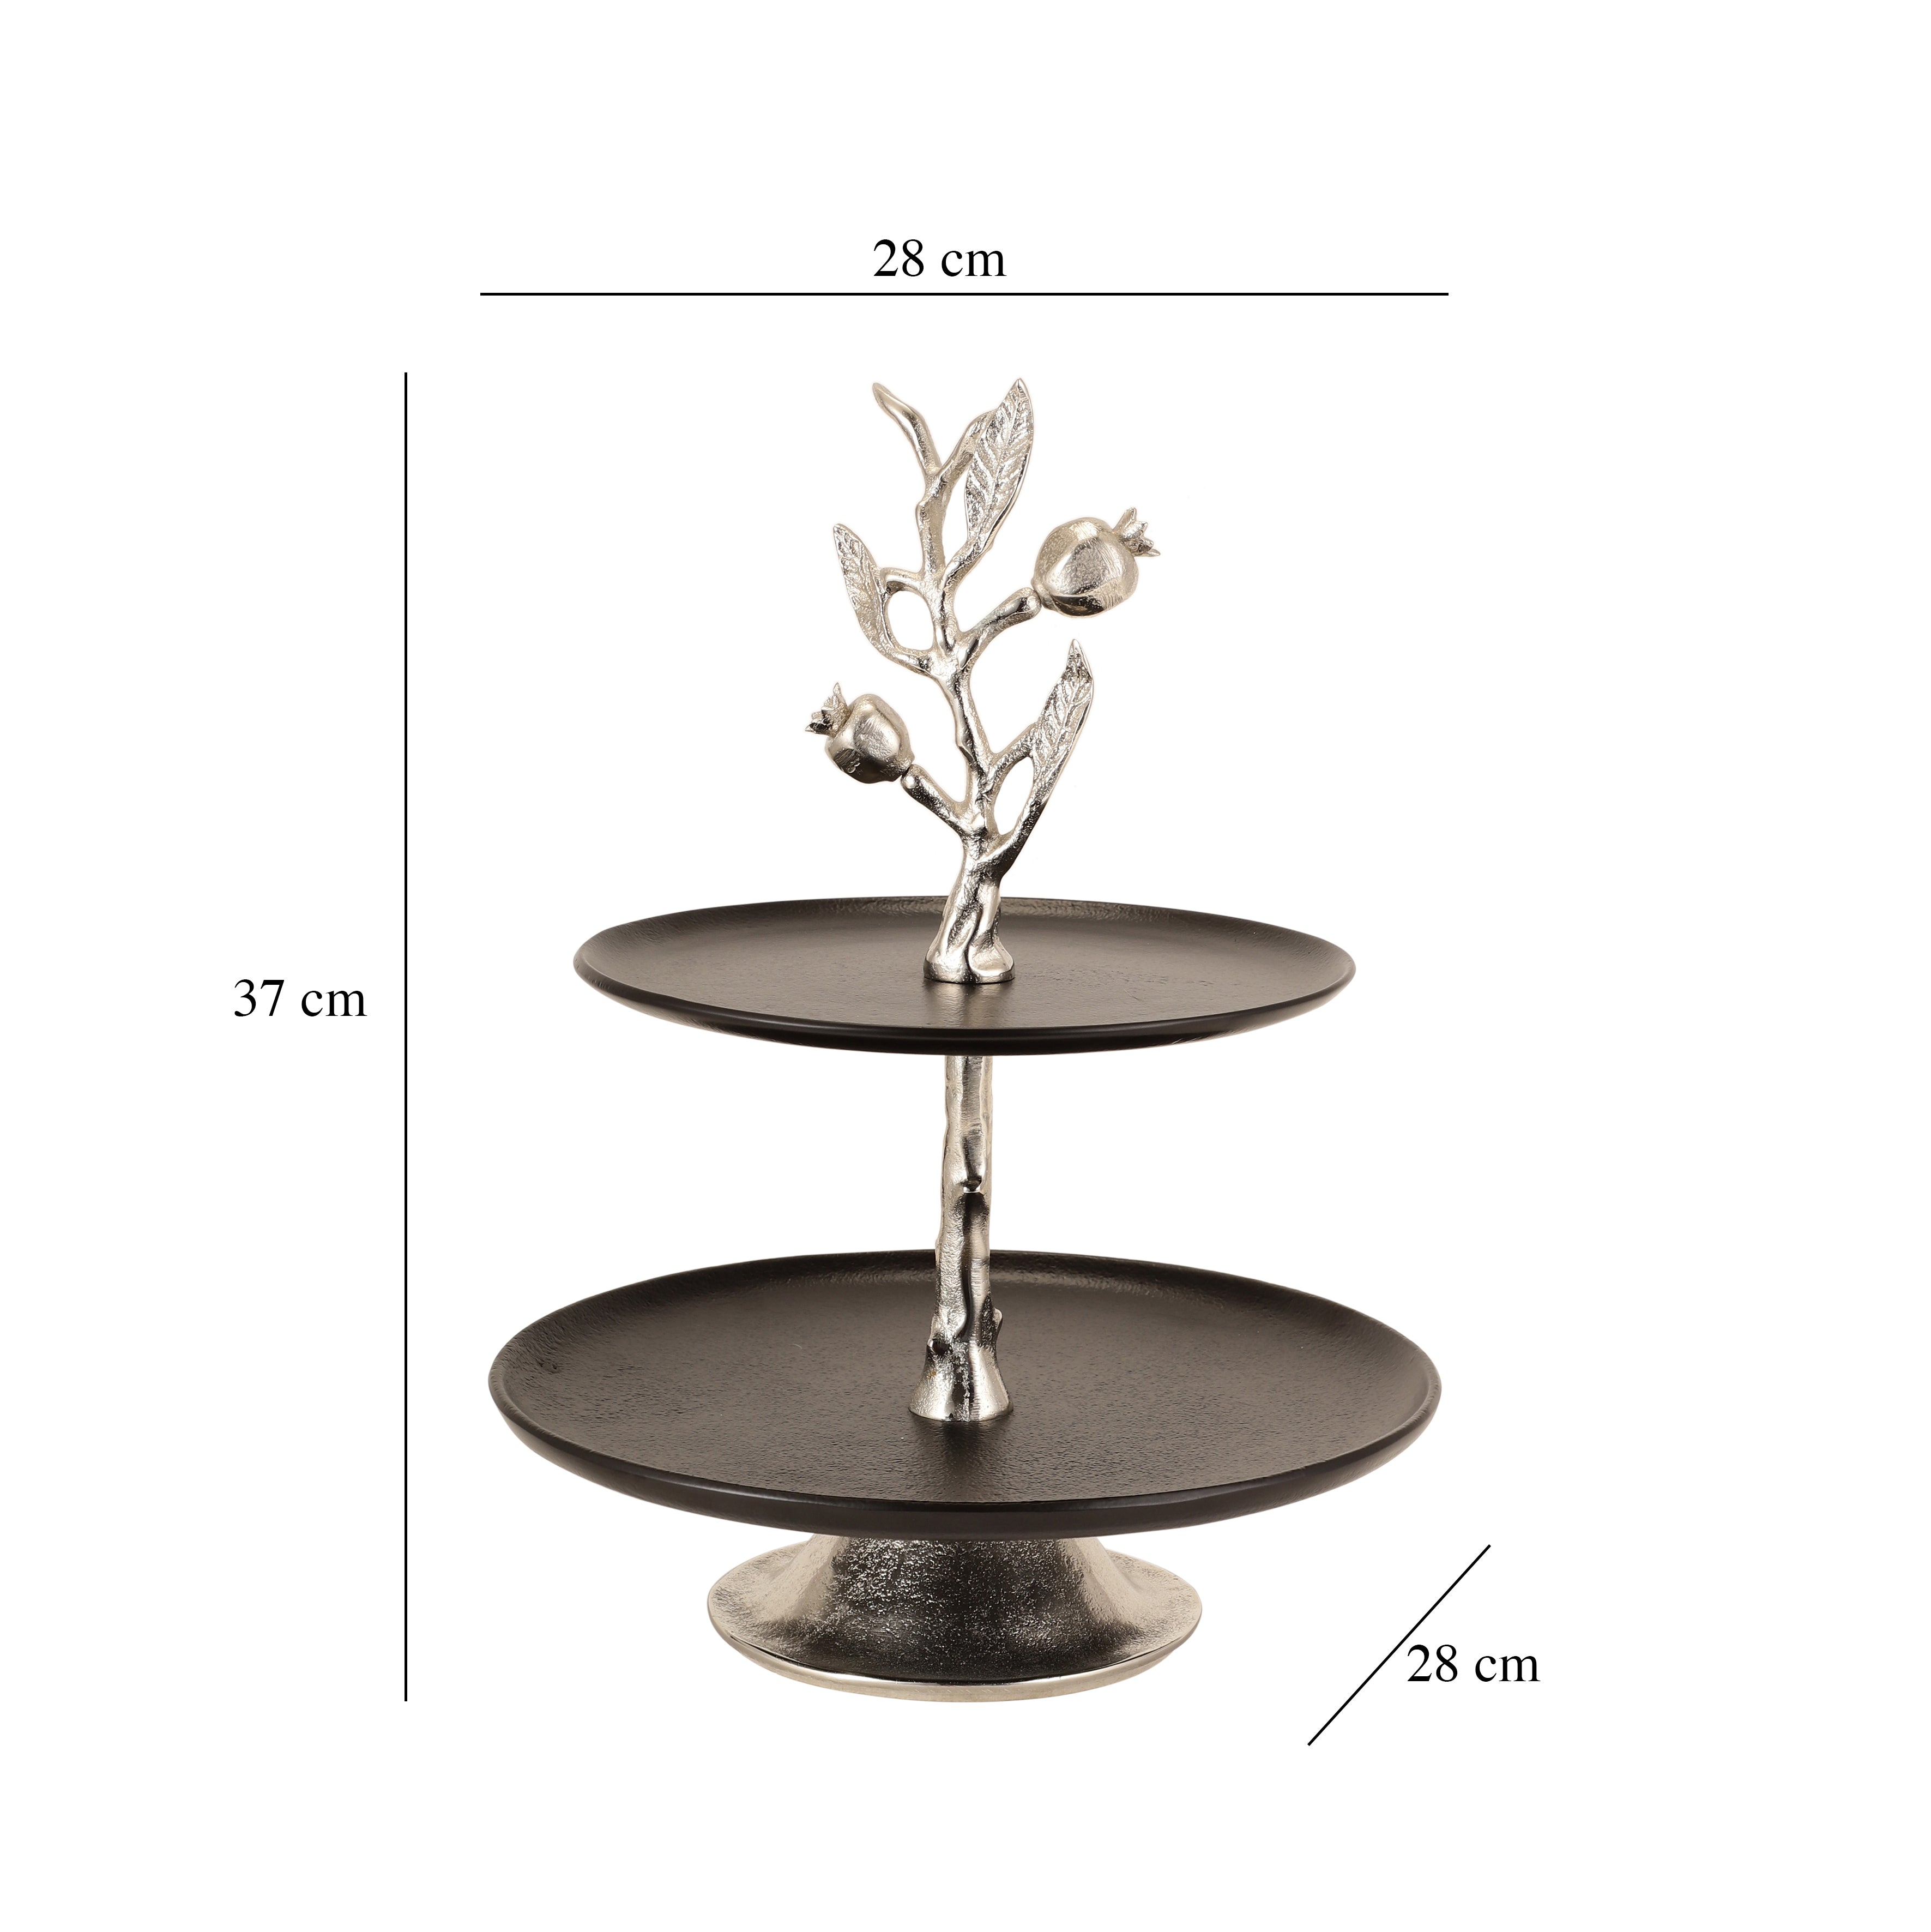 Pomegranate Metal Two layer cake stand in Silver Black